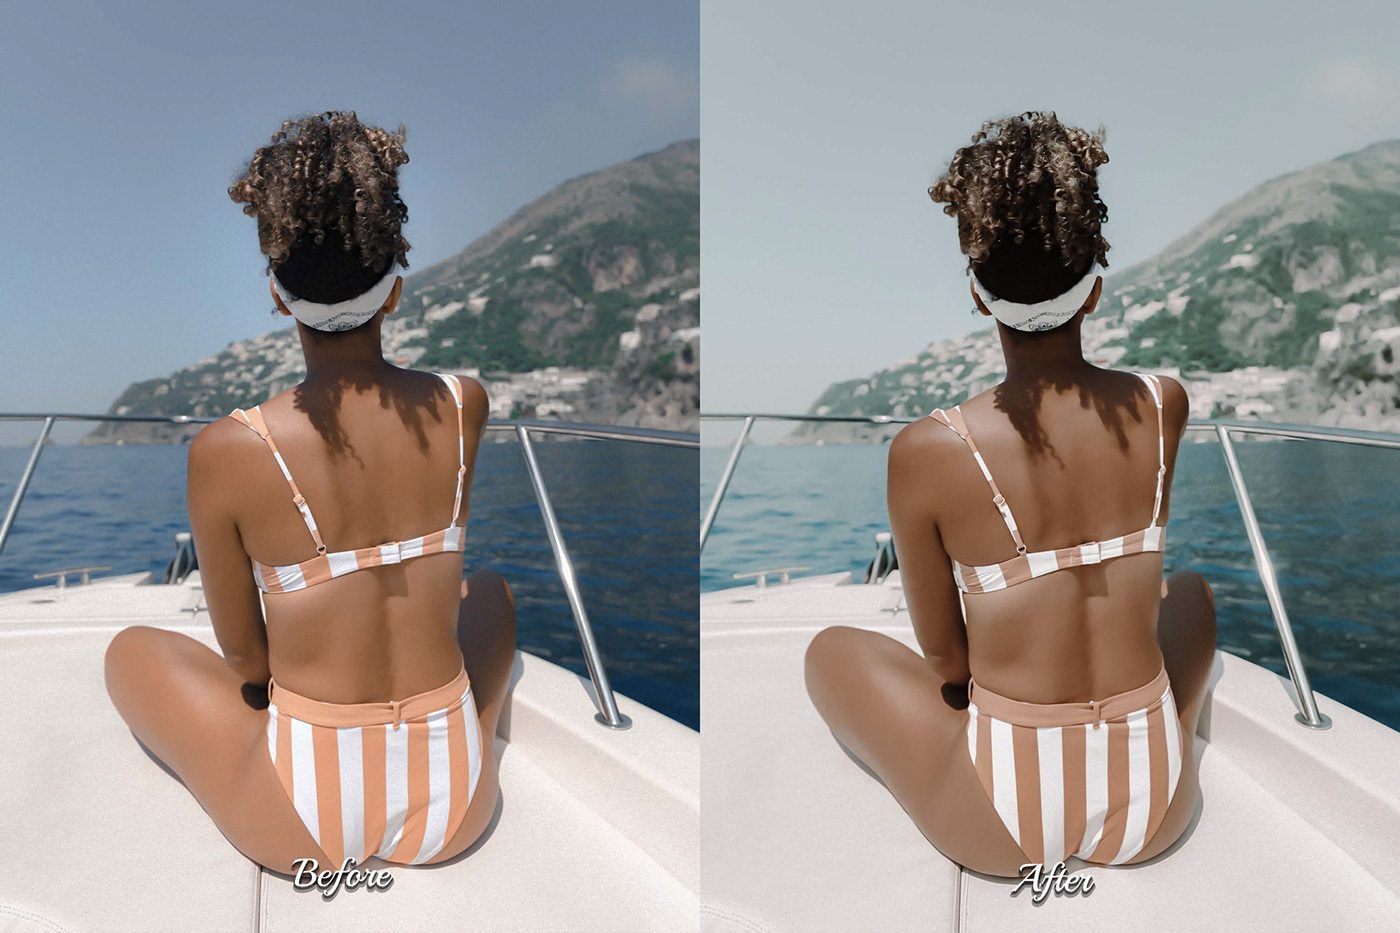 lightroom presets summer photography outdoor photography beach presets bright whites coconut presets mobile presets Photography Filters tropical lifestyle Warm skin tones